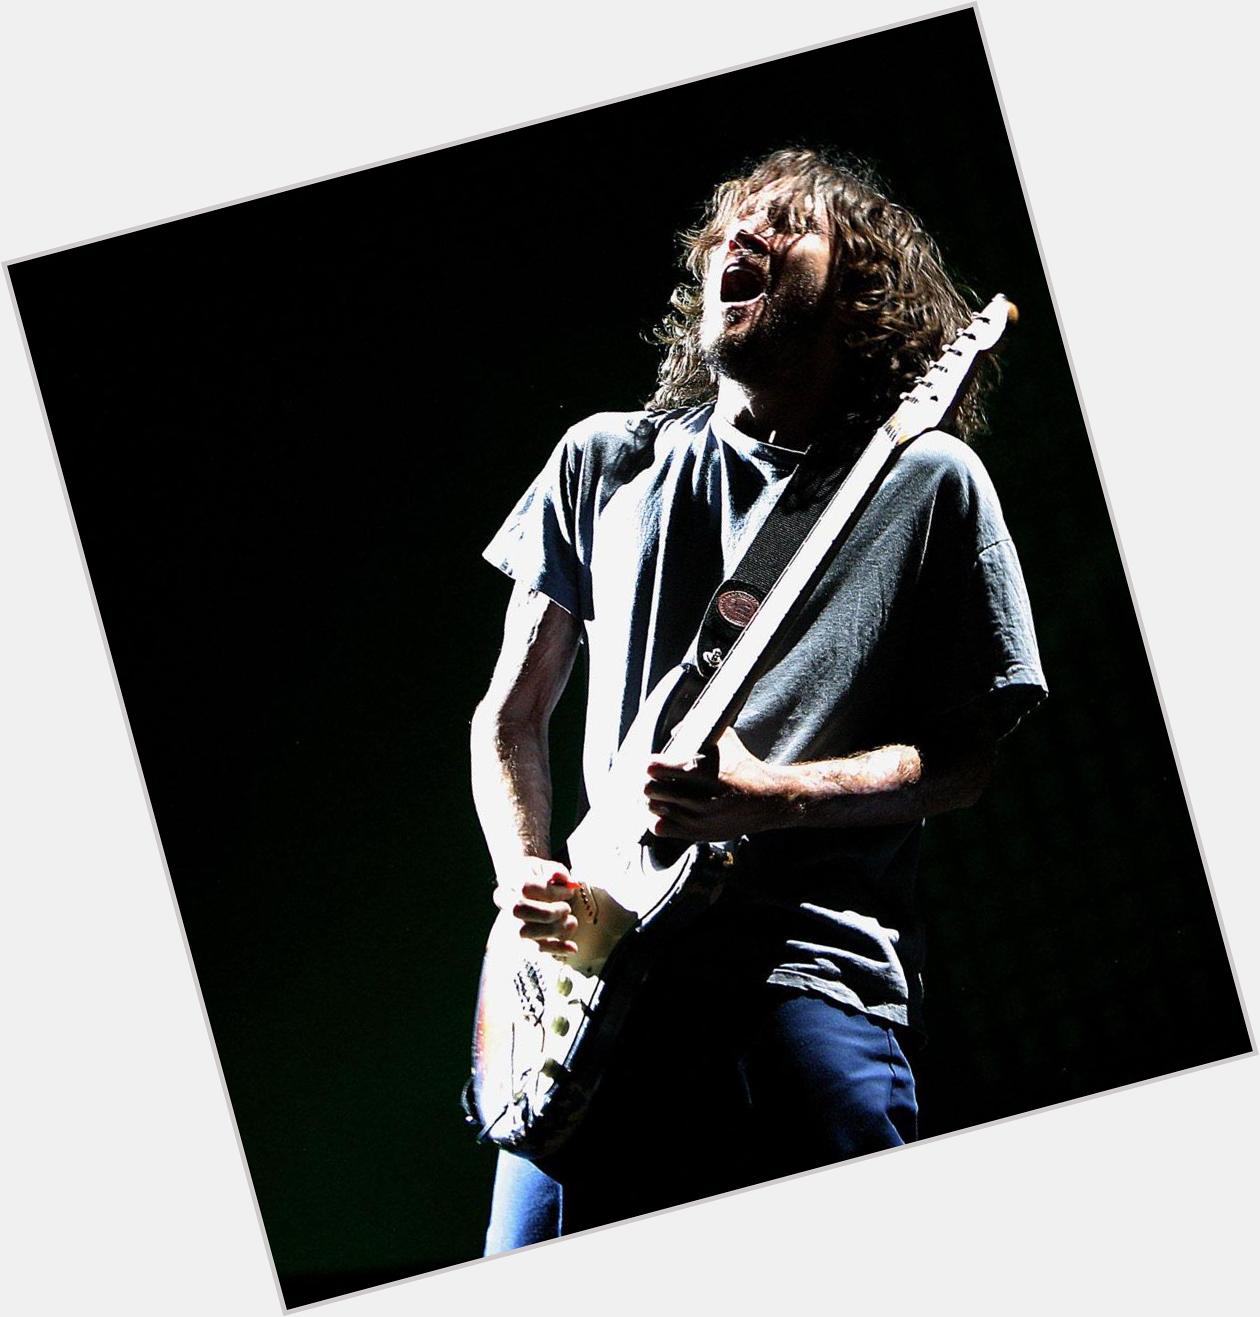 Happy birthday to my biggest inspiration, John Frusciante of the Red Hot Chili Peppers 